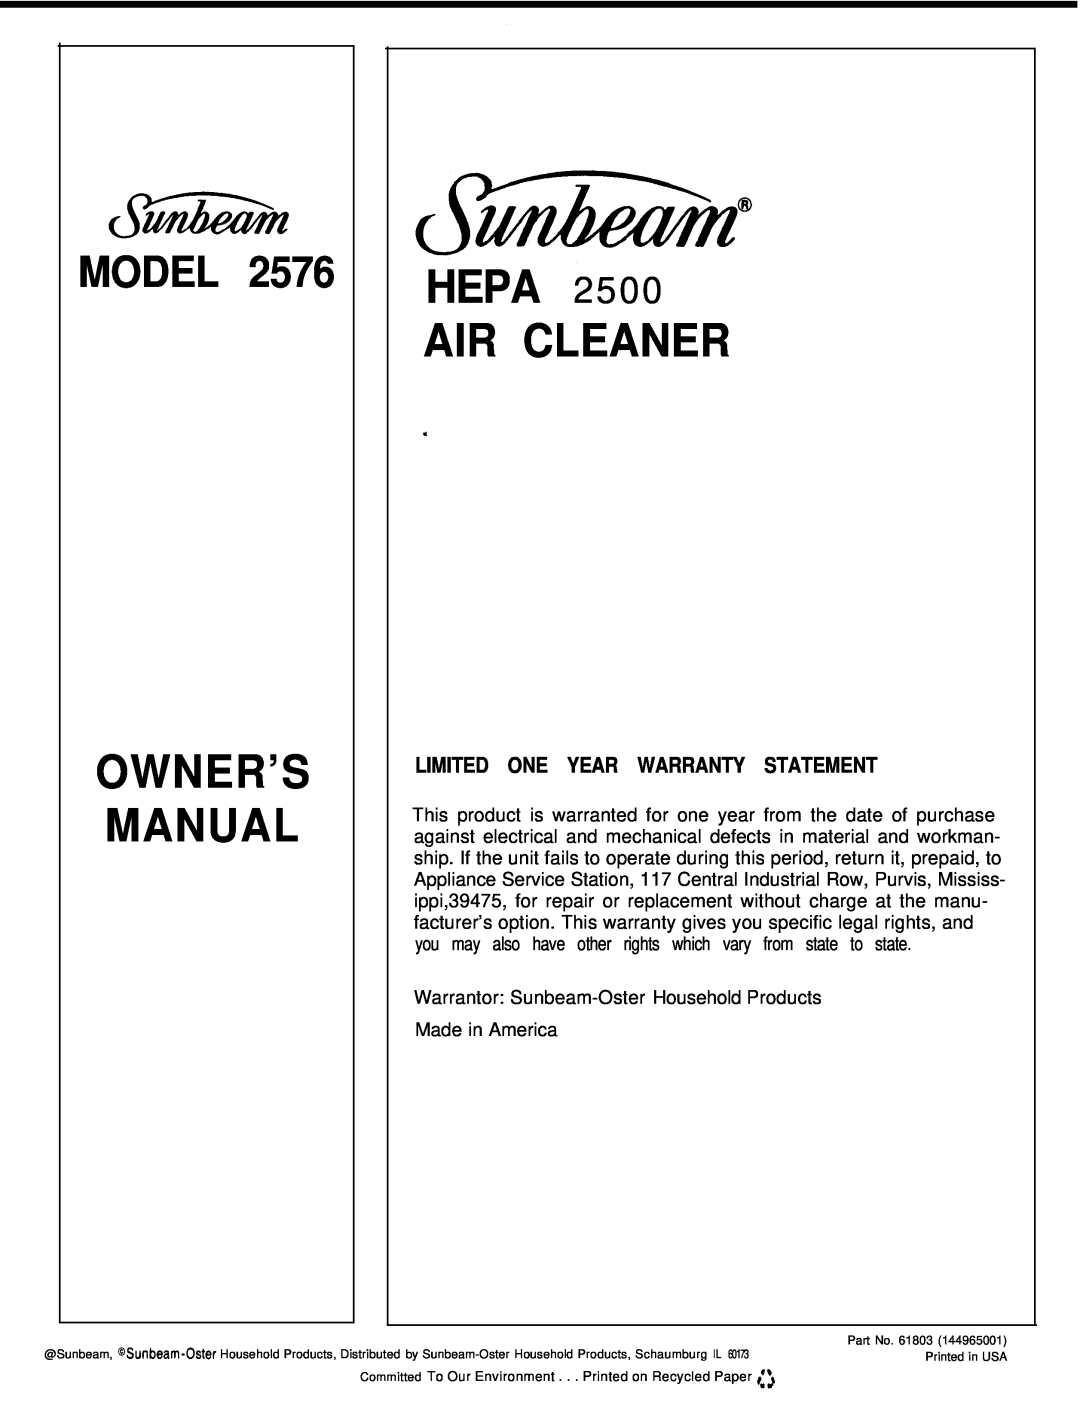 Sunbeam 2576 owner manual Limited One Year Warranty Statement, Hepa Air Cleaner, Model 